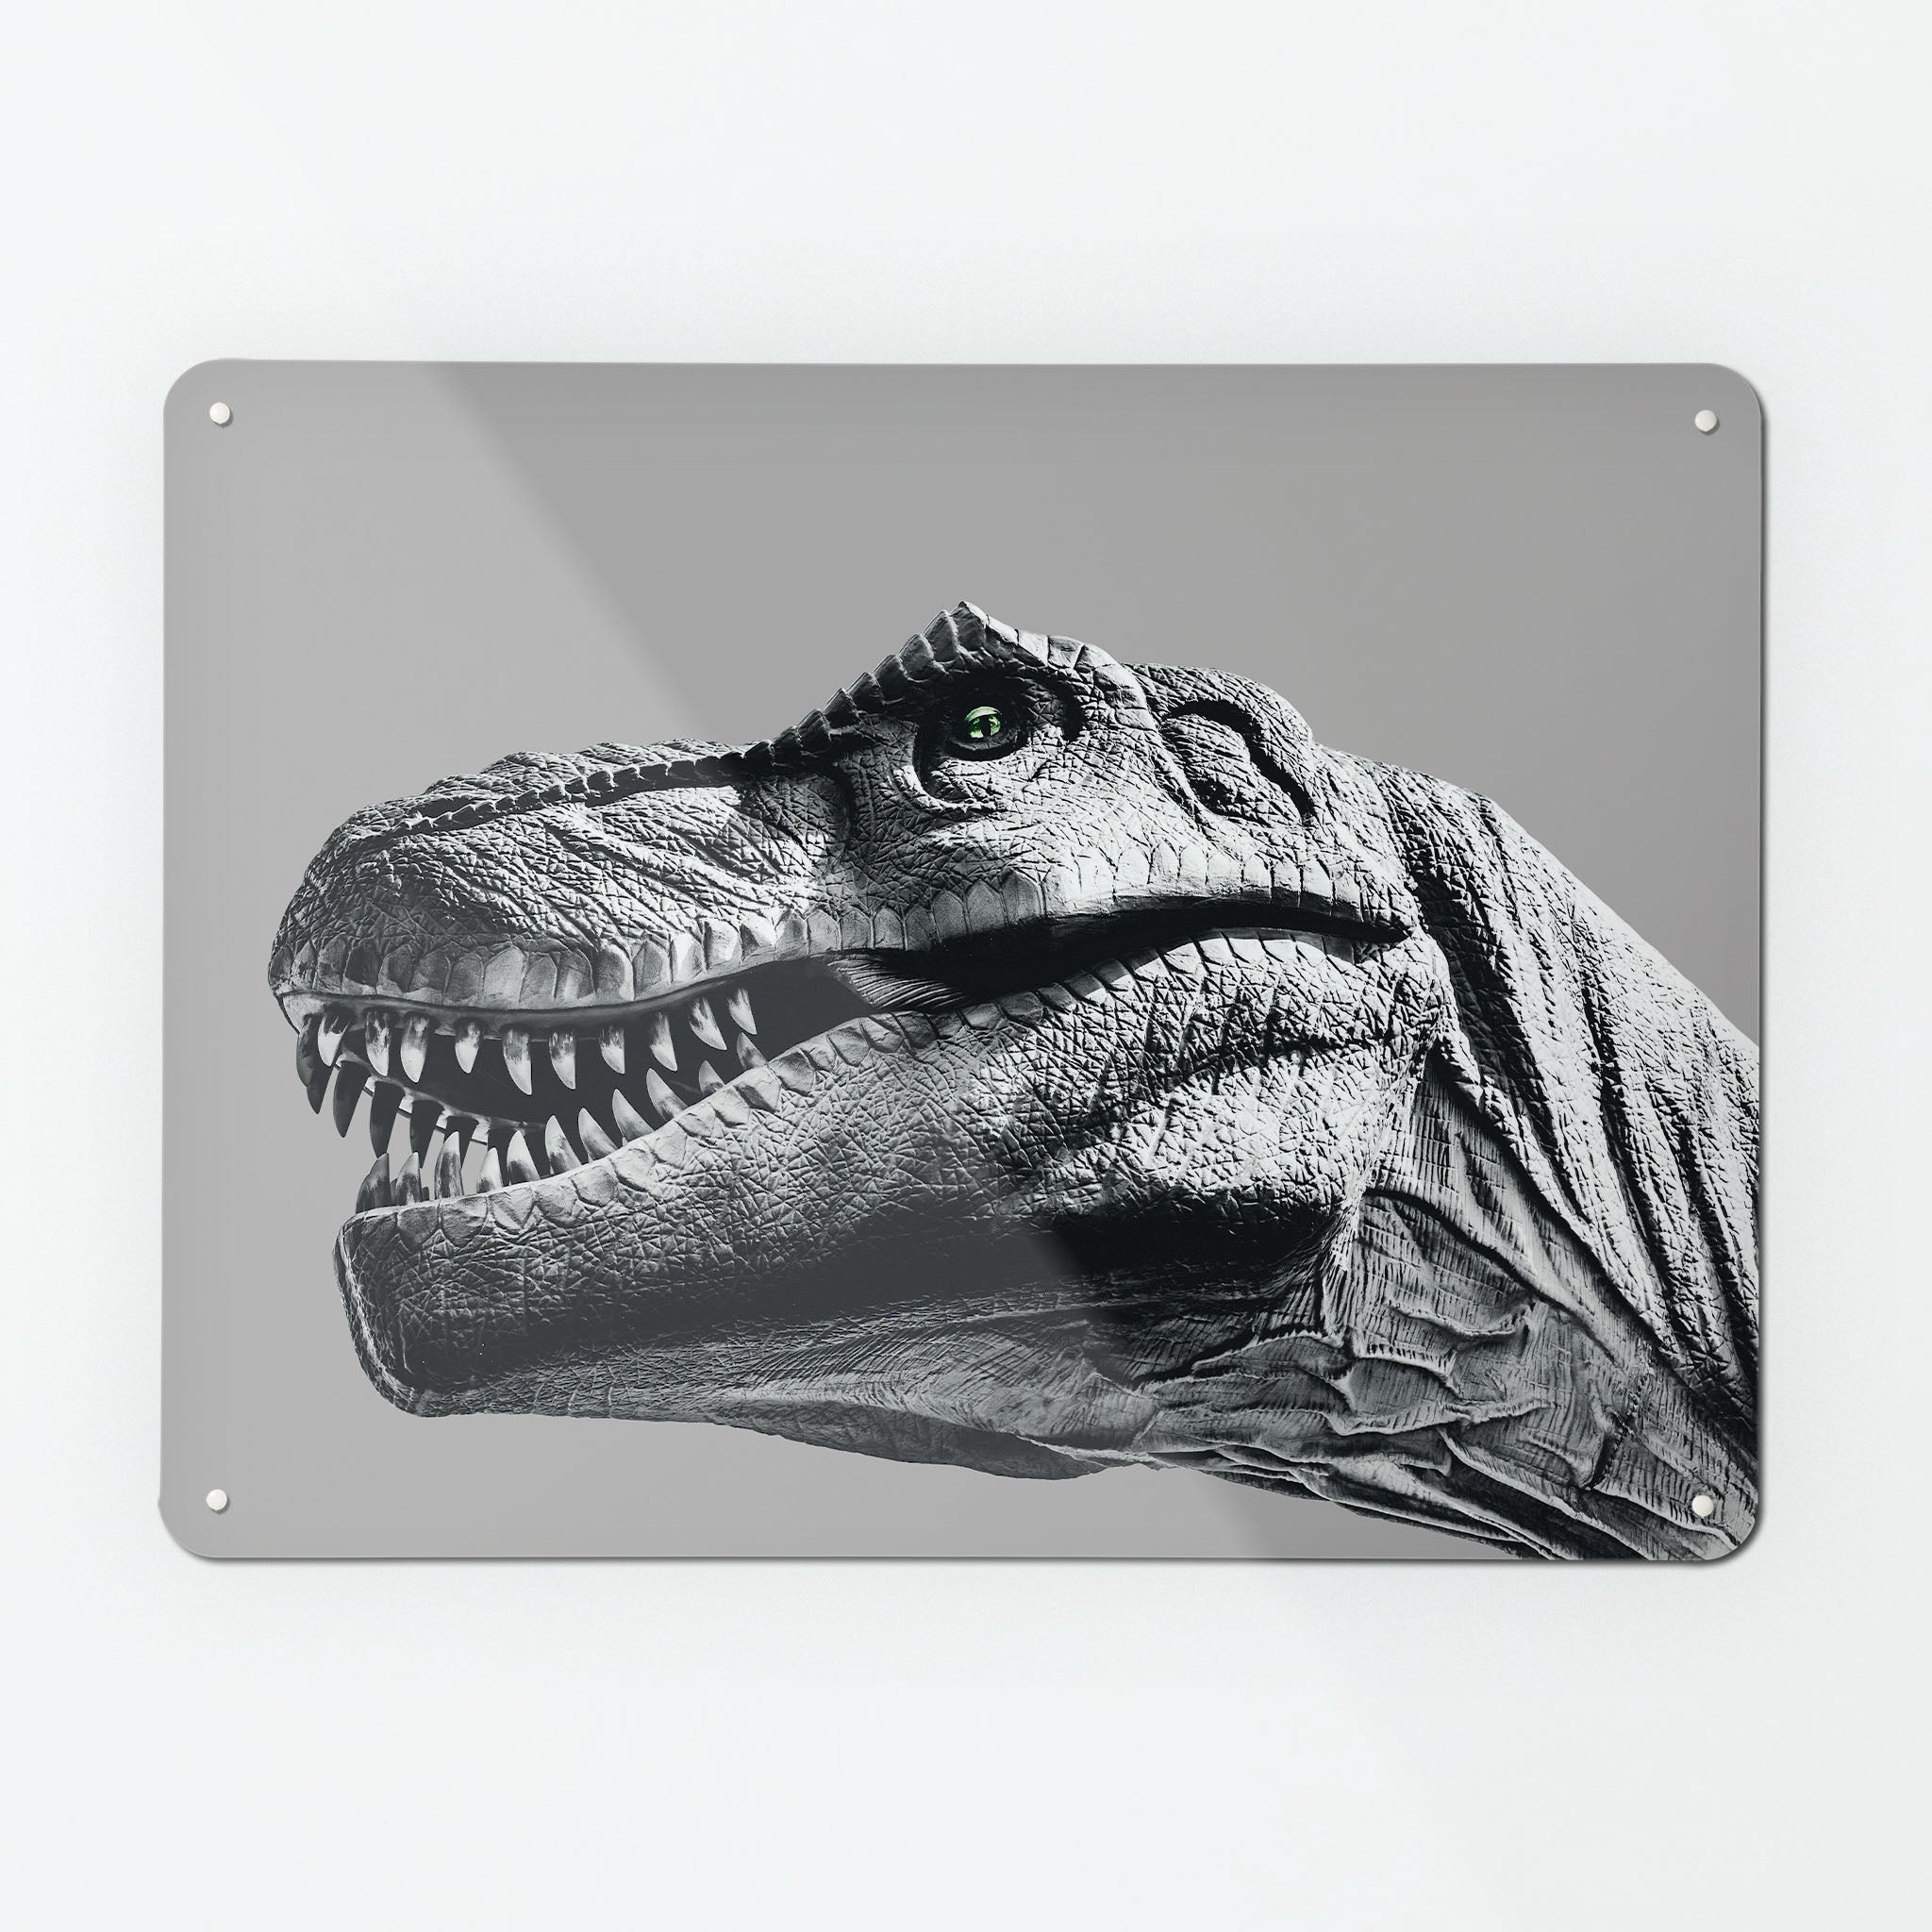 A large magnetic notice board by Beyond the Fridge with an image of a black and white tyrannosaurus rex dinosaur on a grey background